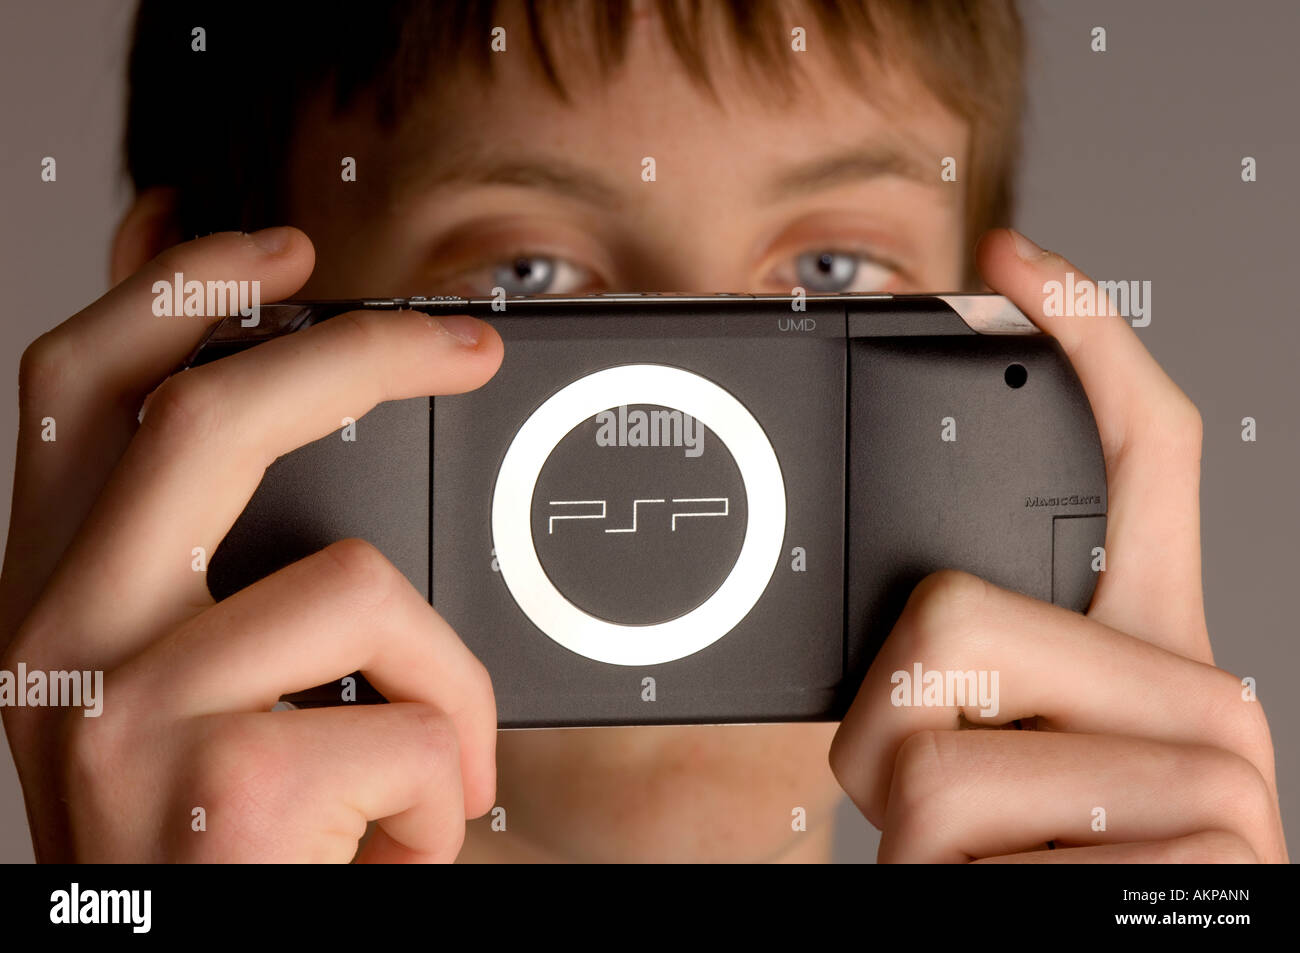 A young teenage boy playing on Sony PSP hand-held computer game console. Stock Photo